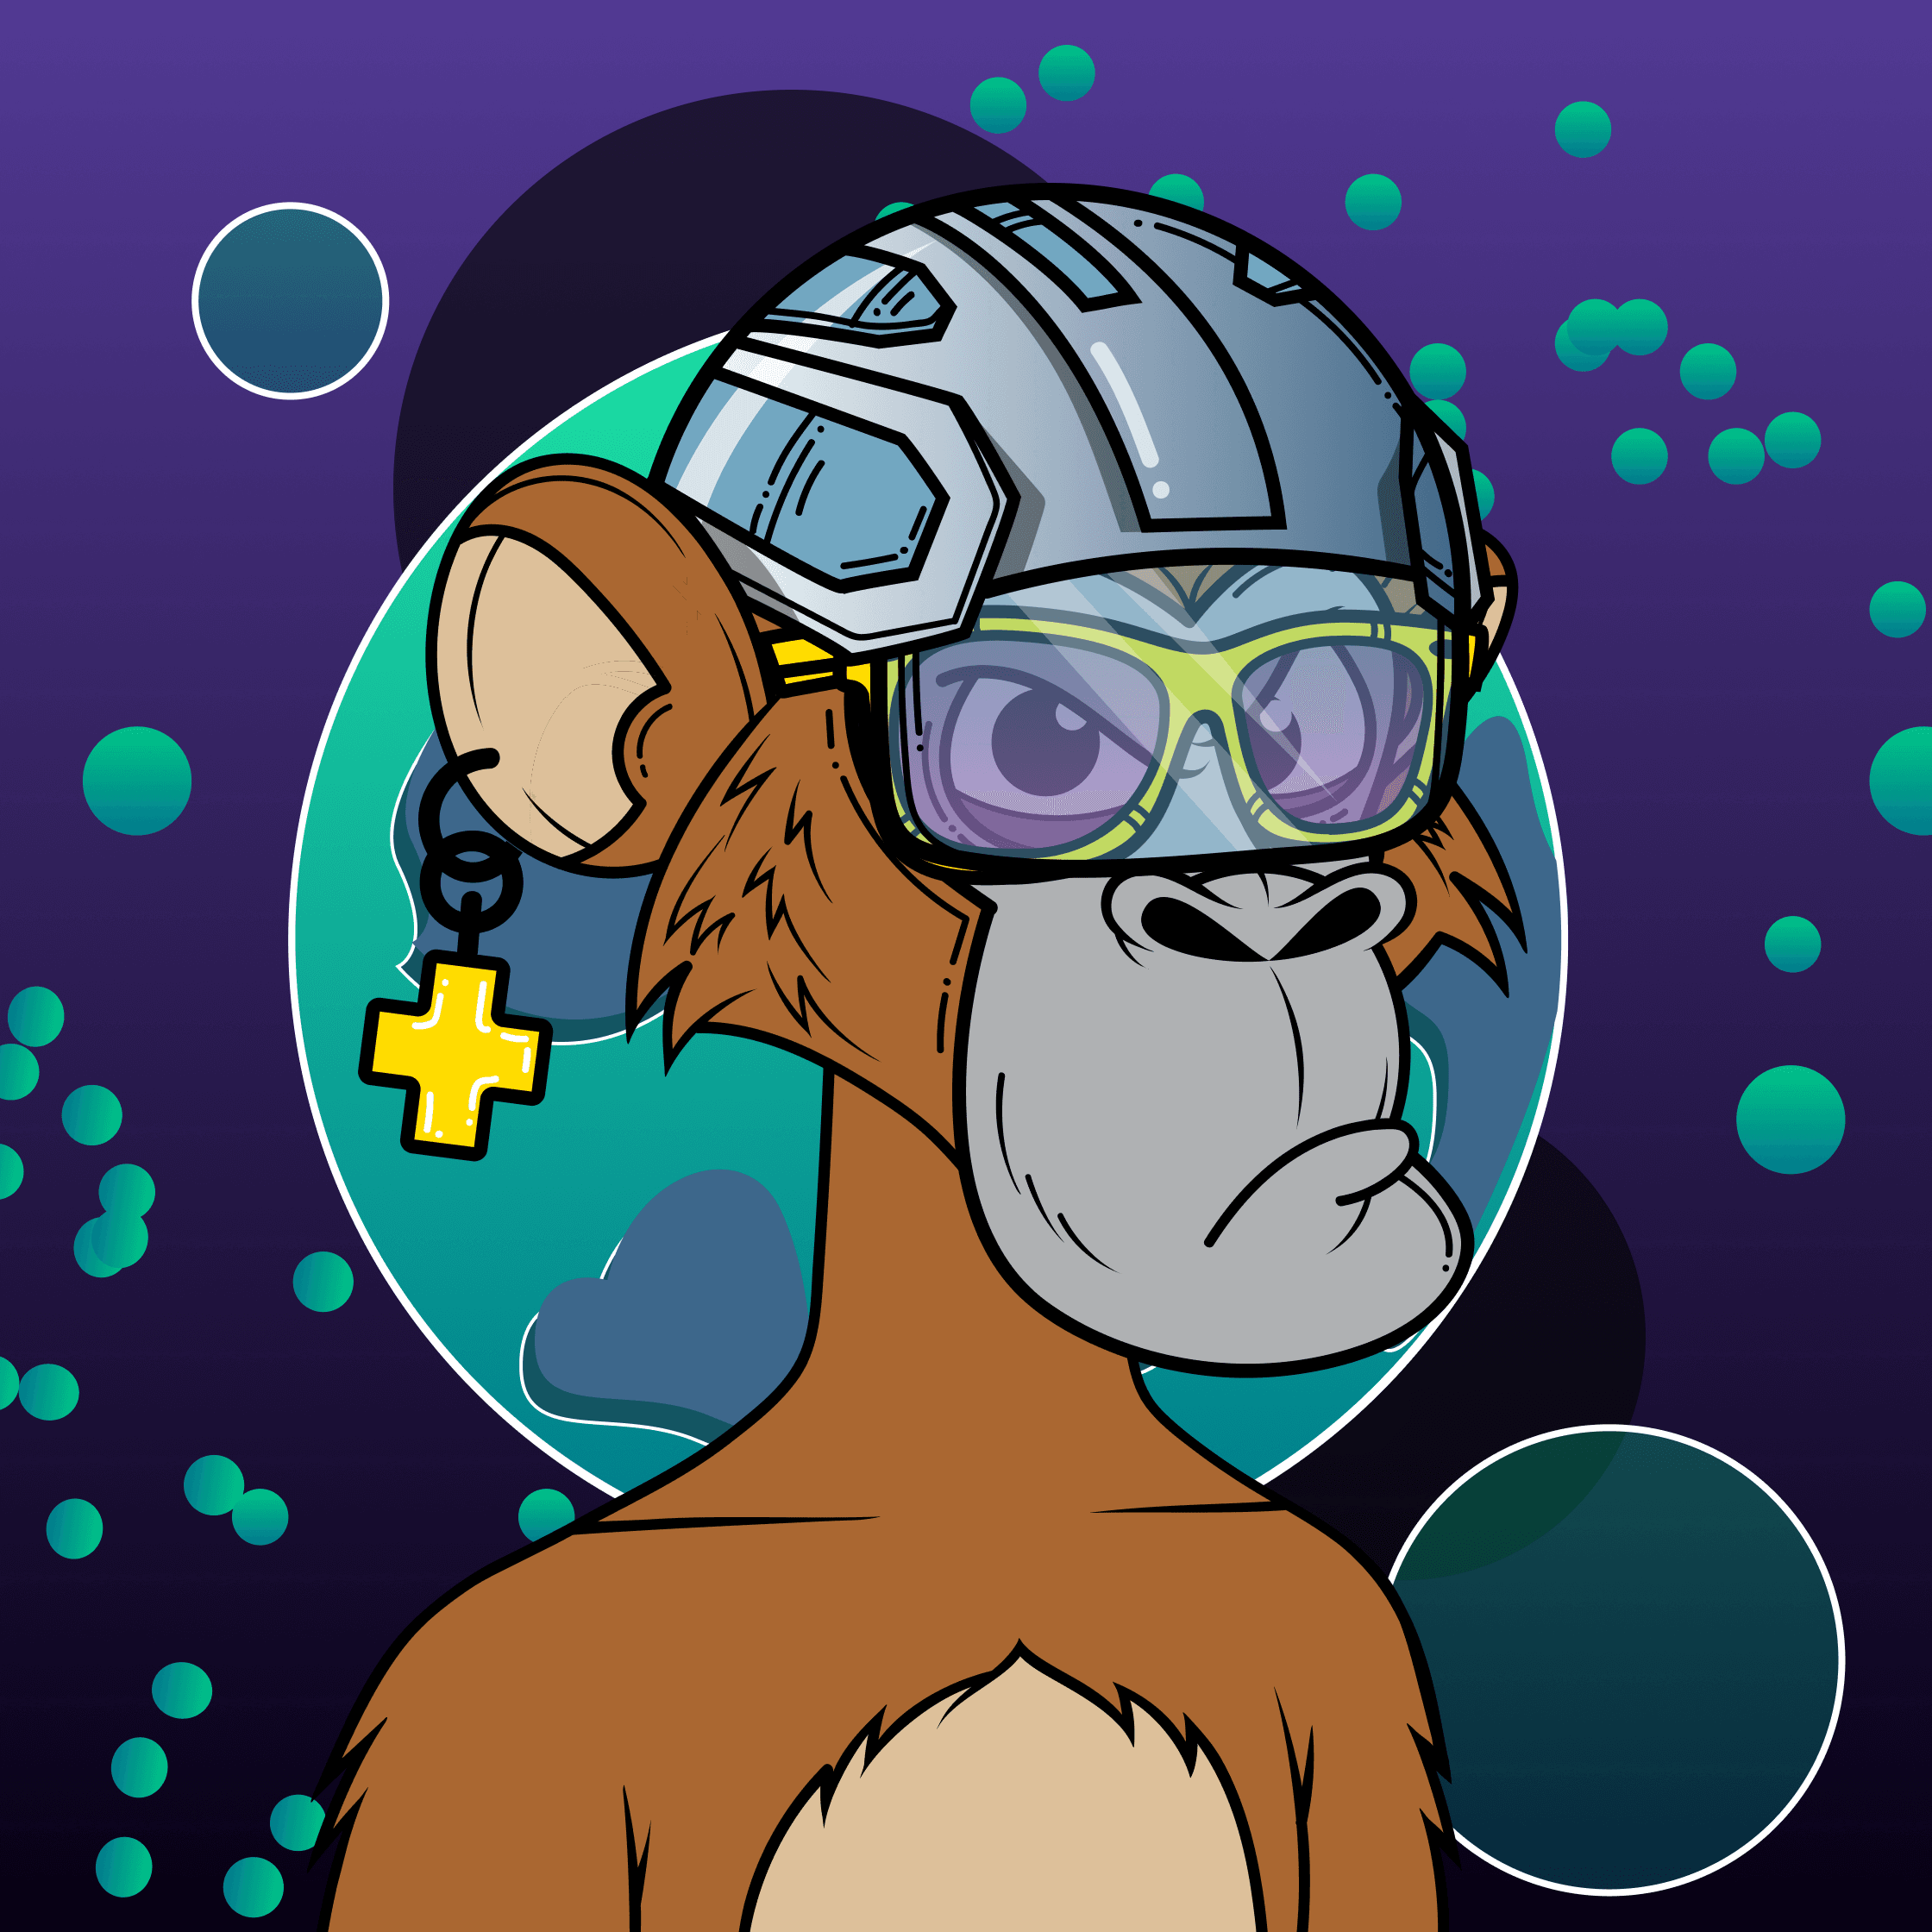 Apes of Space #6956